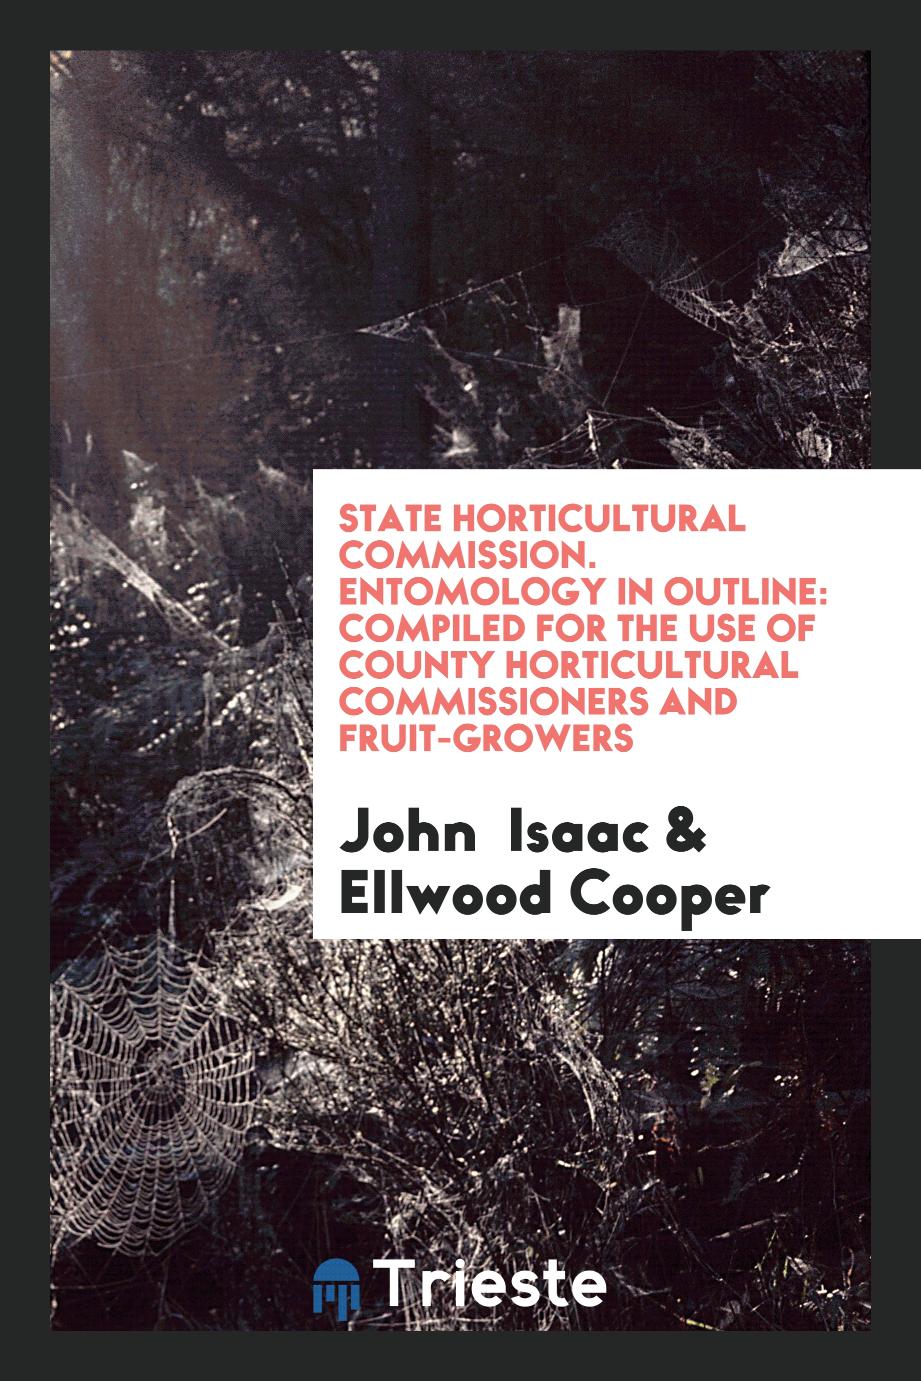 State Horticultural Commission. Entomology in Outline: Compiled for the Use of County Horticultural Commissioners and Fruit-Growers